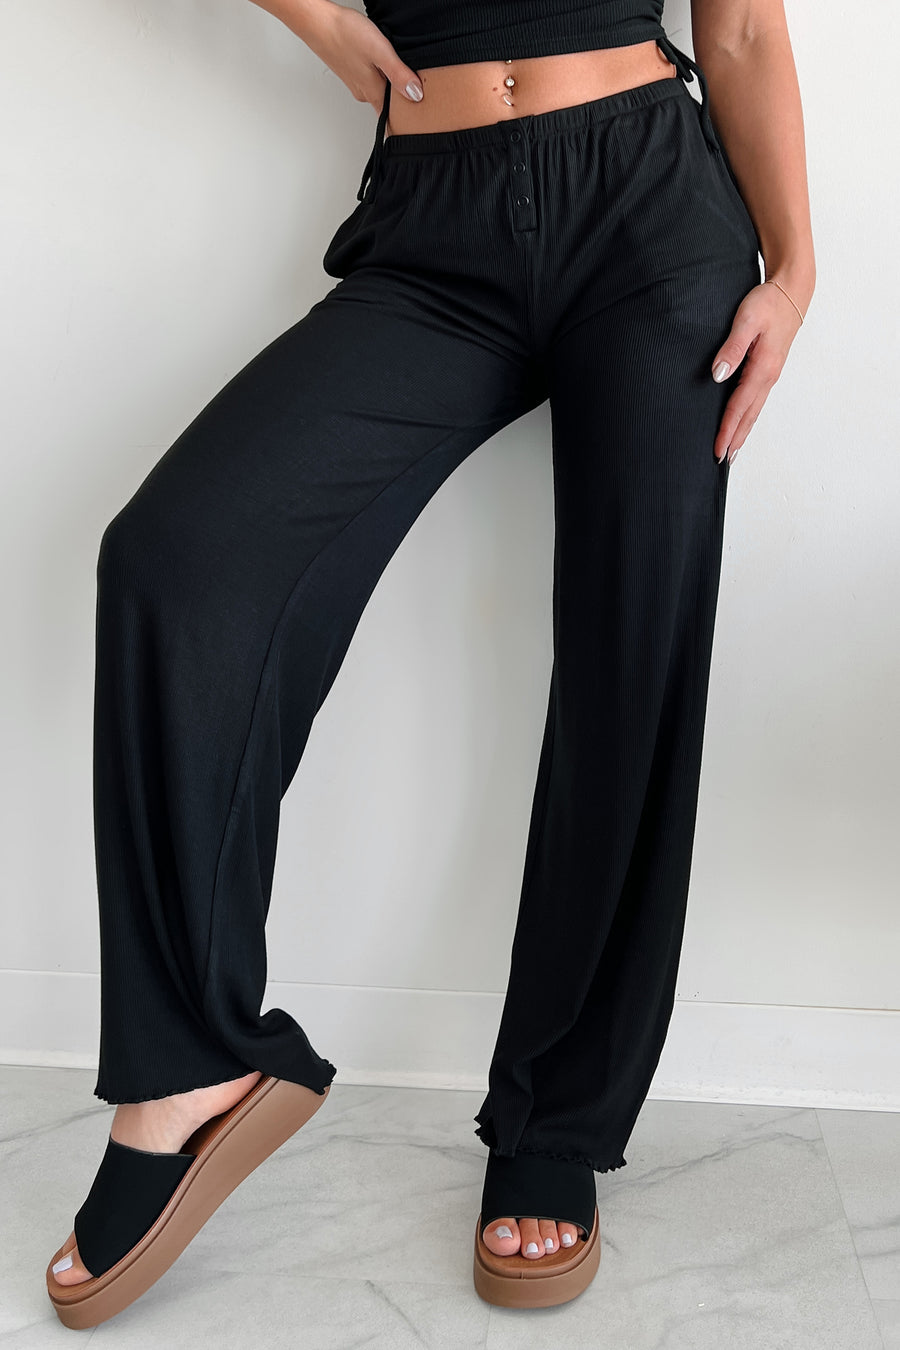 All Tuckered Out Ribbed Lounge Pants (Black)